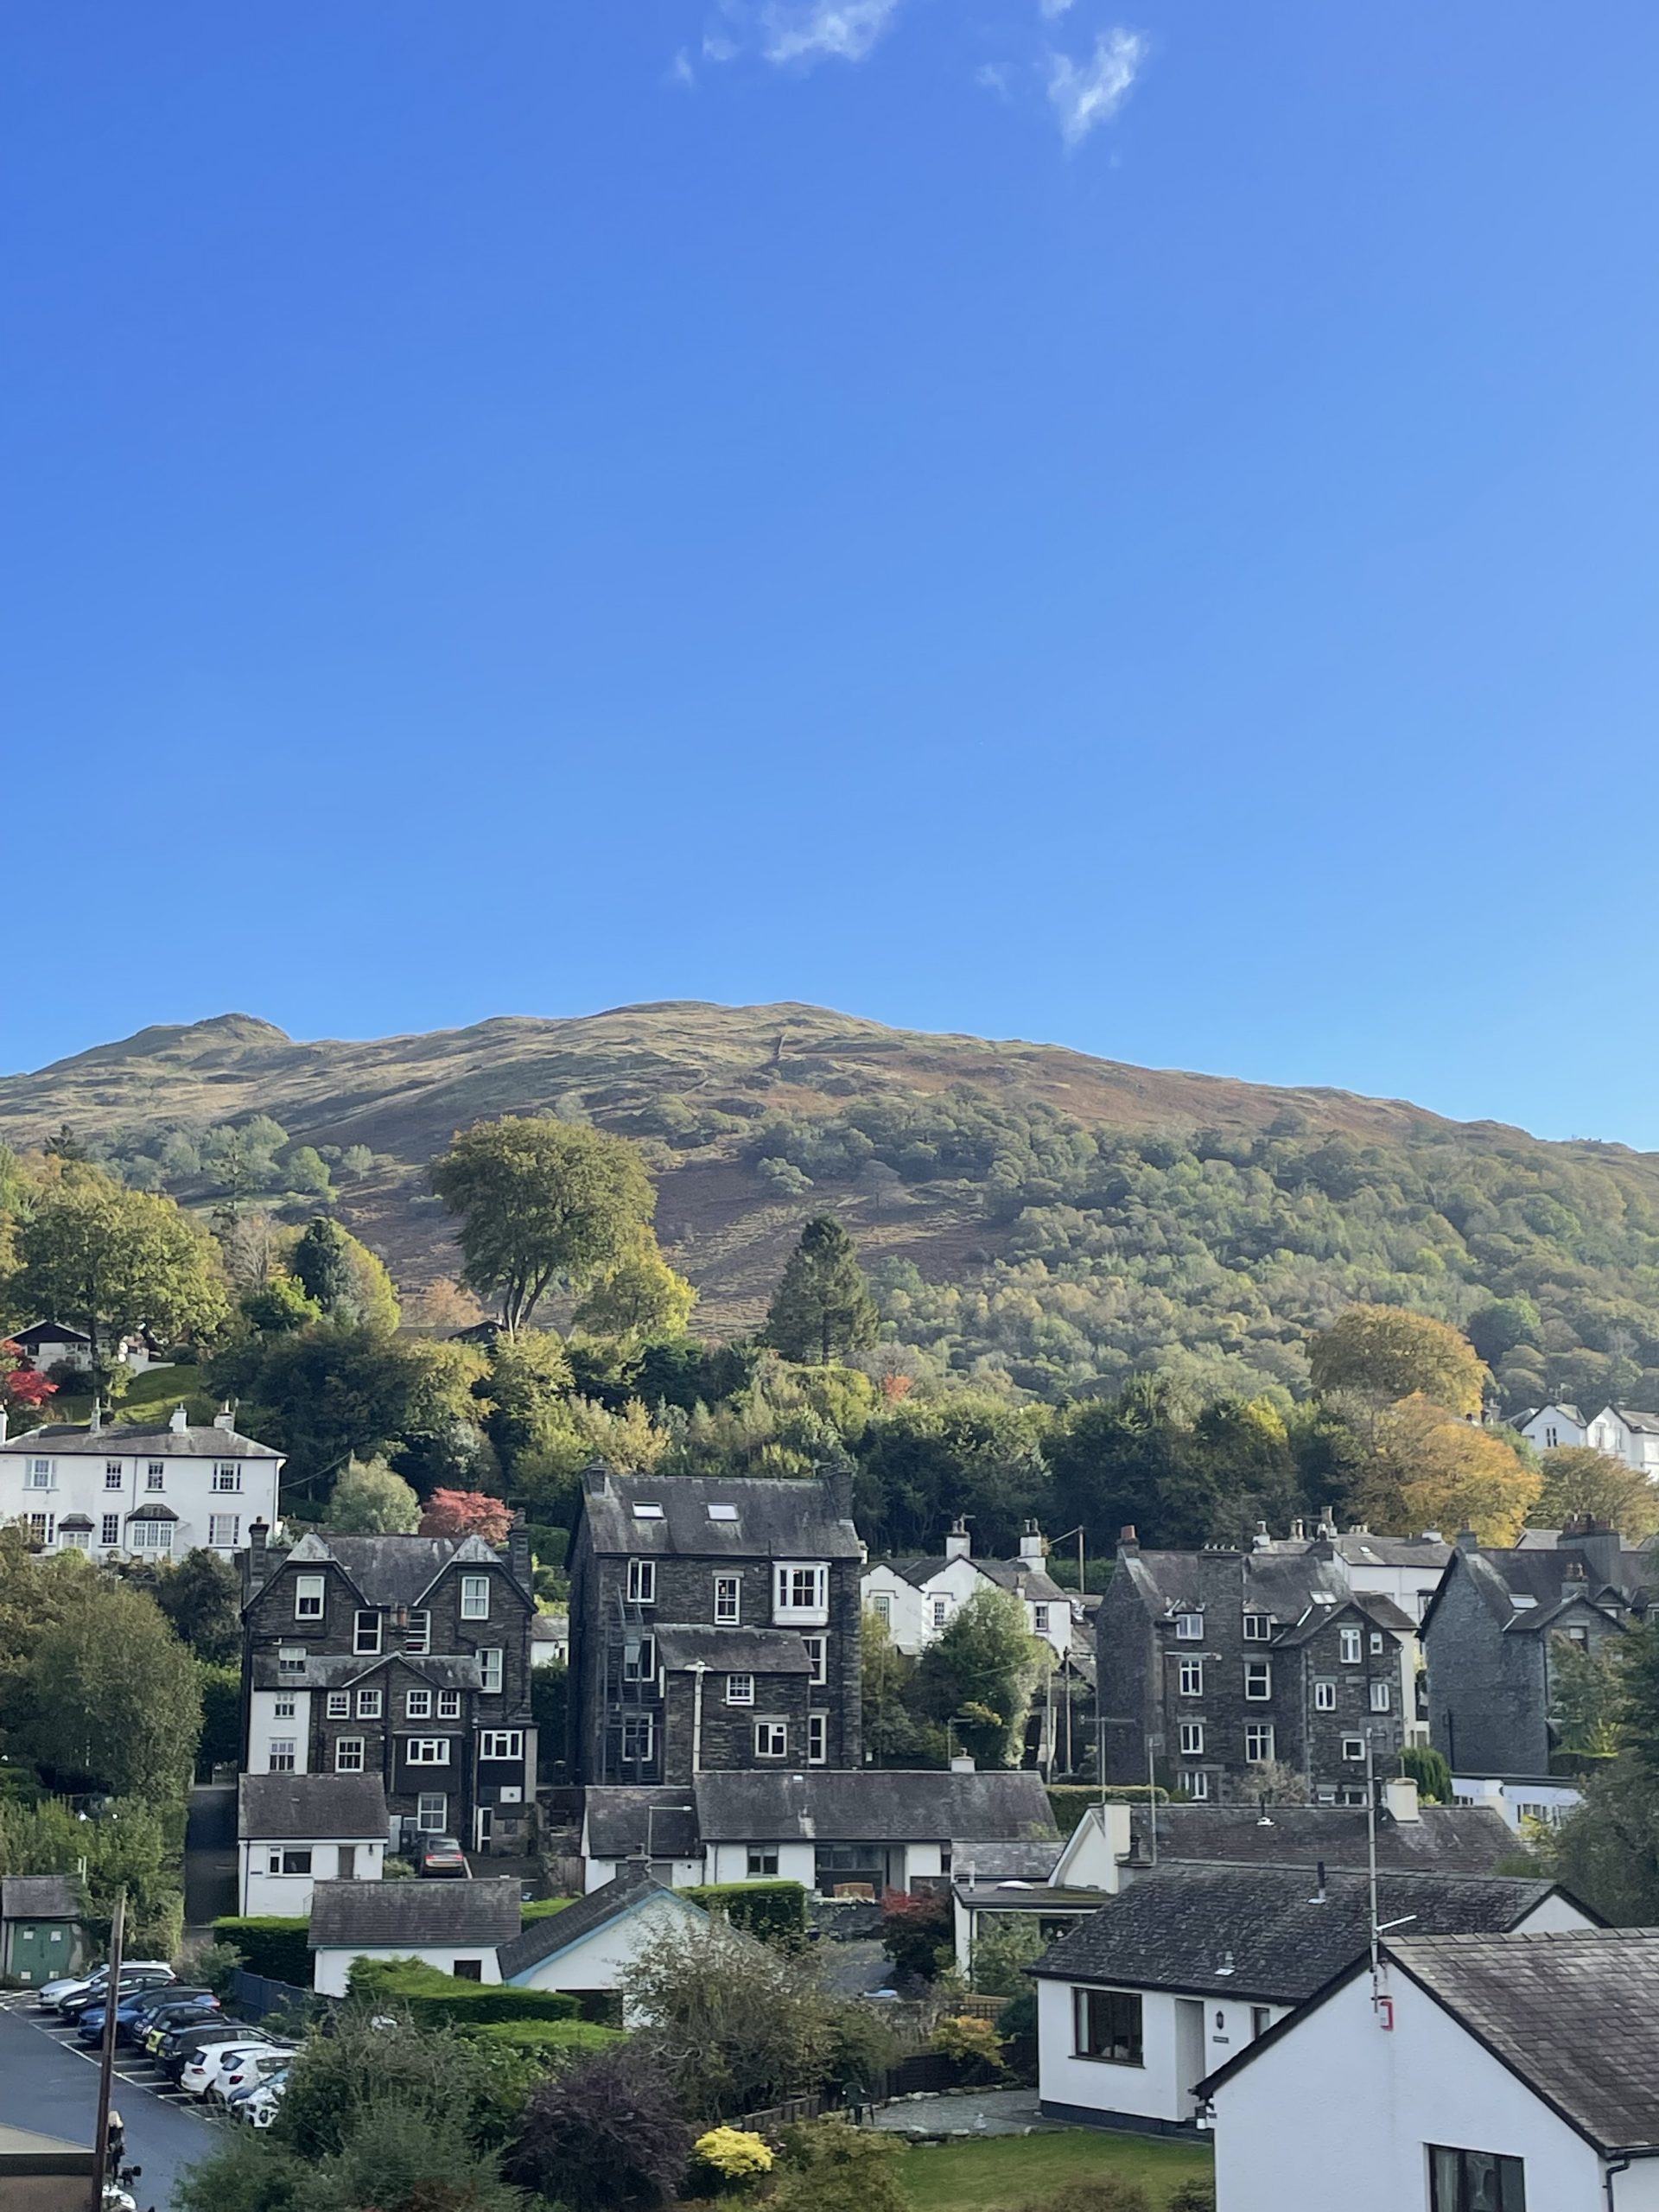 The complete guide to visiting Ambleside in the Lake District